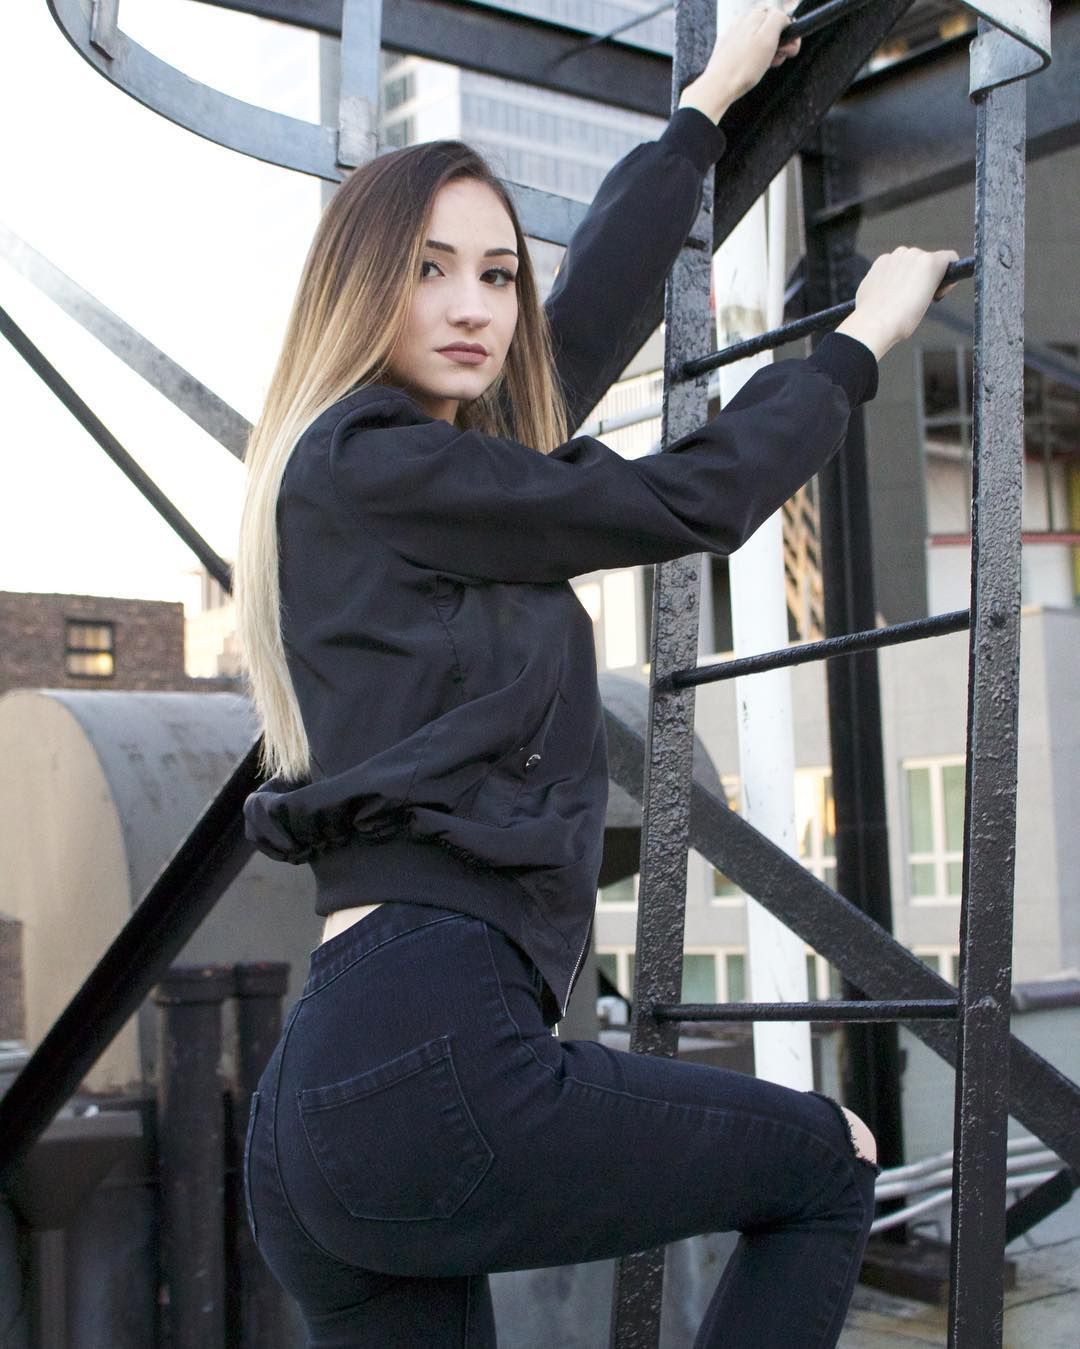 BeautyChickee is enjoying a lavish life with her boyfriend and family.